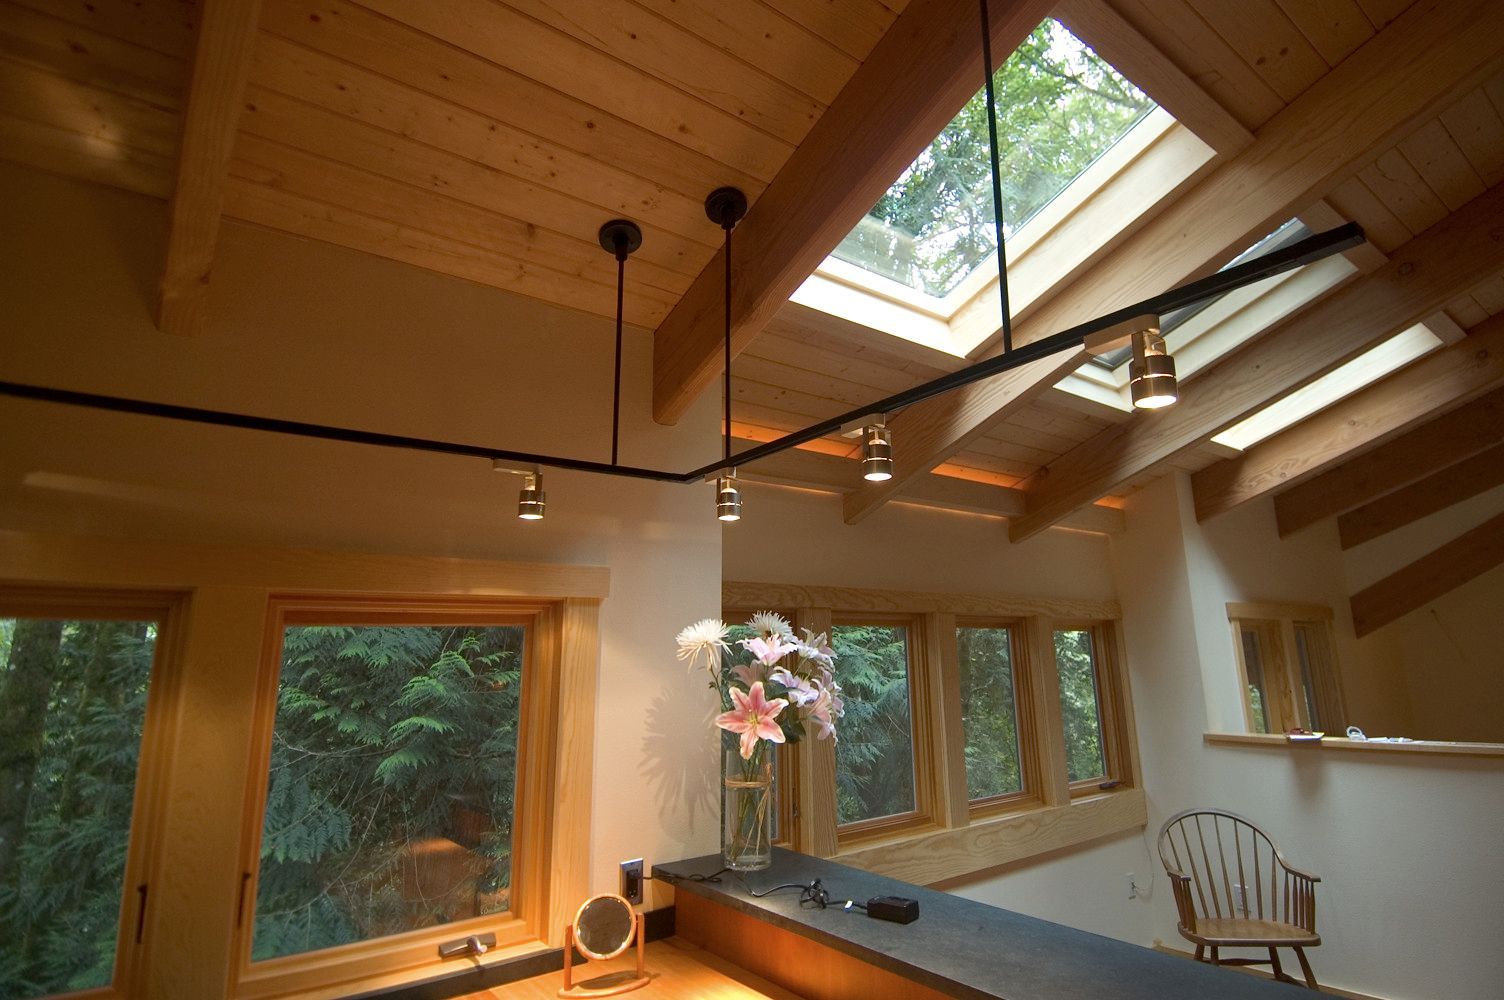 Are you looking for Skylight Installers in the Golden Horseshoe area? We install skylights and sun tunnels in Hamilton, Burlington, Oakville, Grimsby, Niagara Region,  St Catharines and beyond!